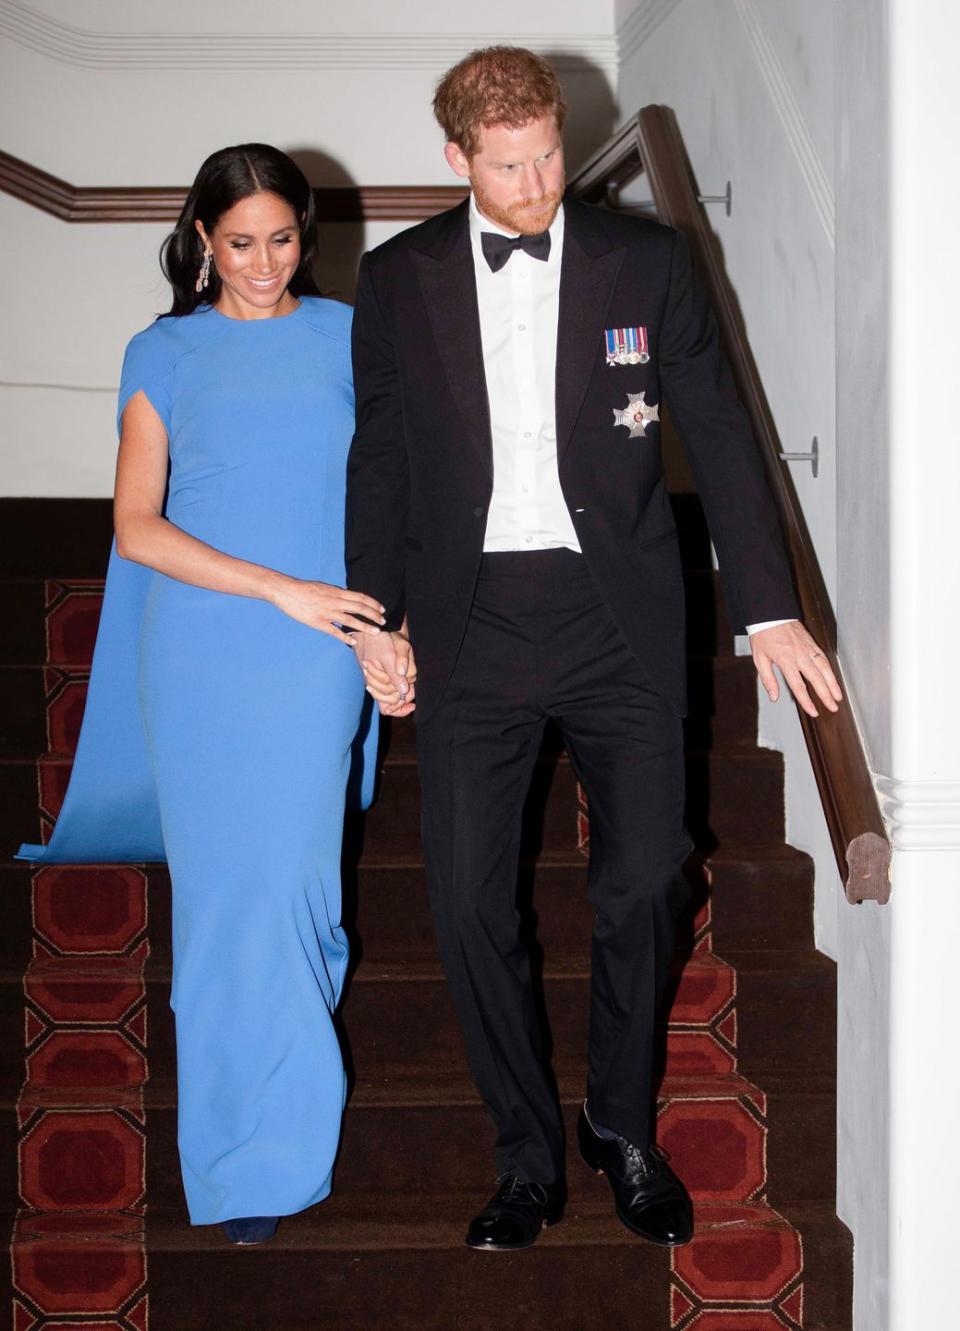 Harry and Meghan arrive hand in hand at a State Dinner hosted by the President of Fiji.